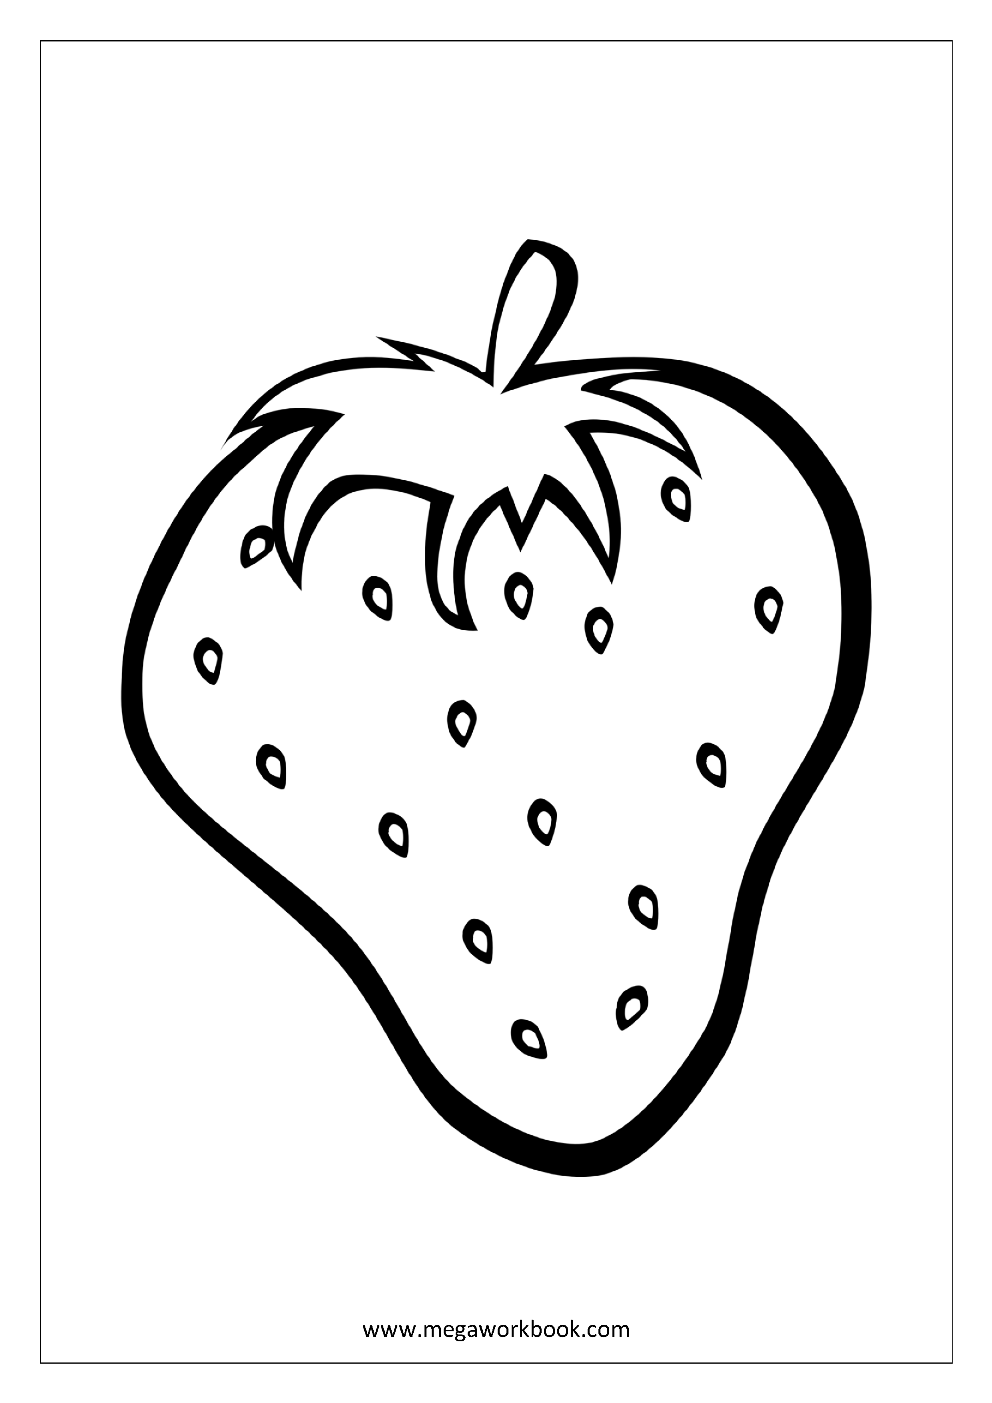 Fruit Coloring Pages   Vegetable Coloring Pages   Food Coloring ...